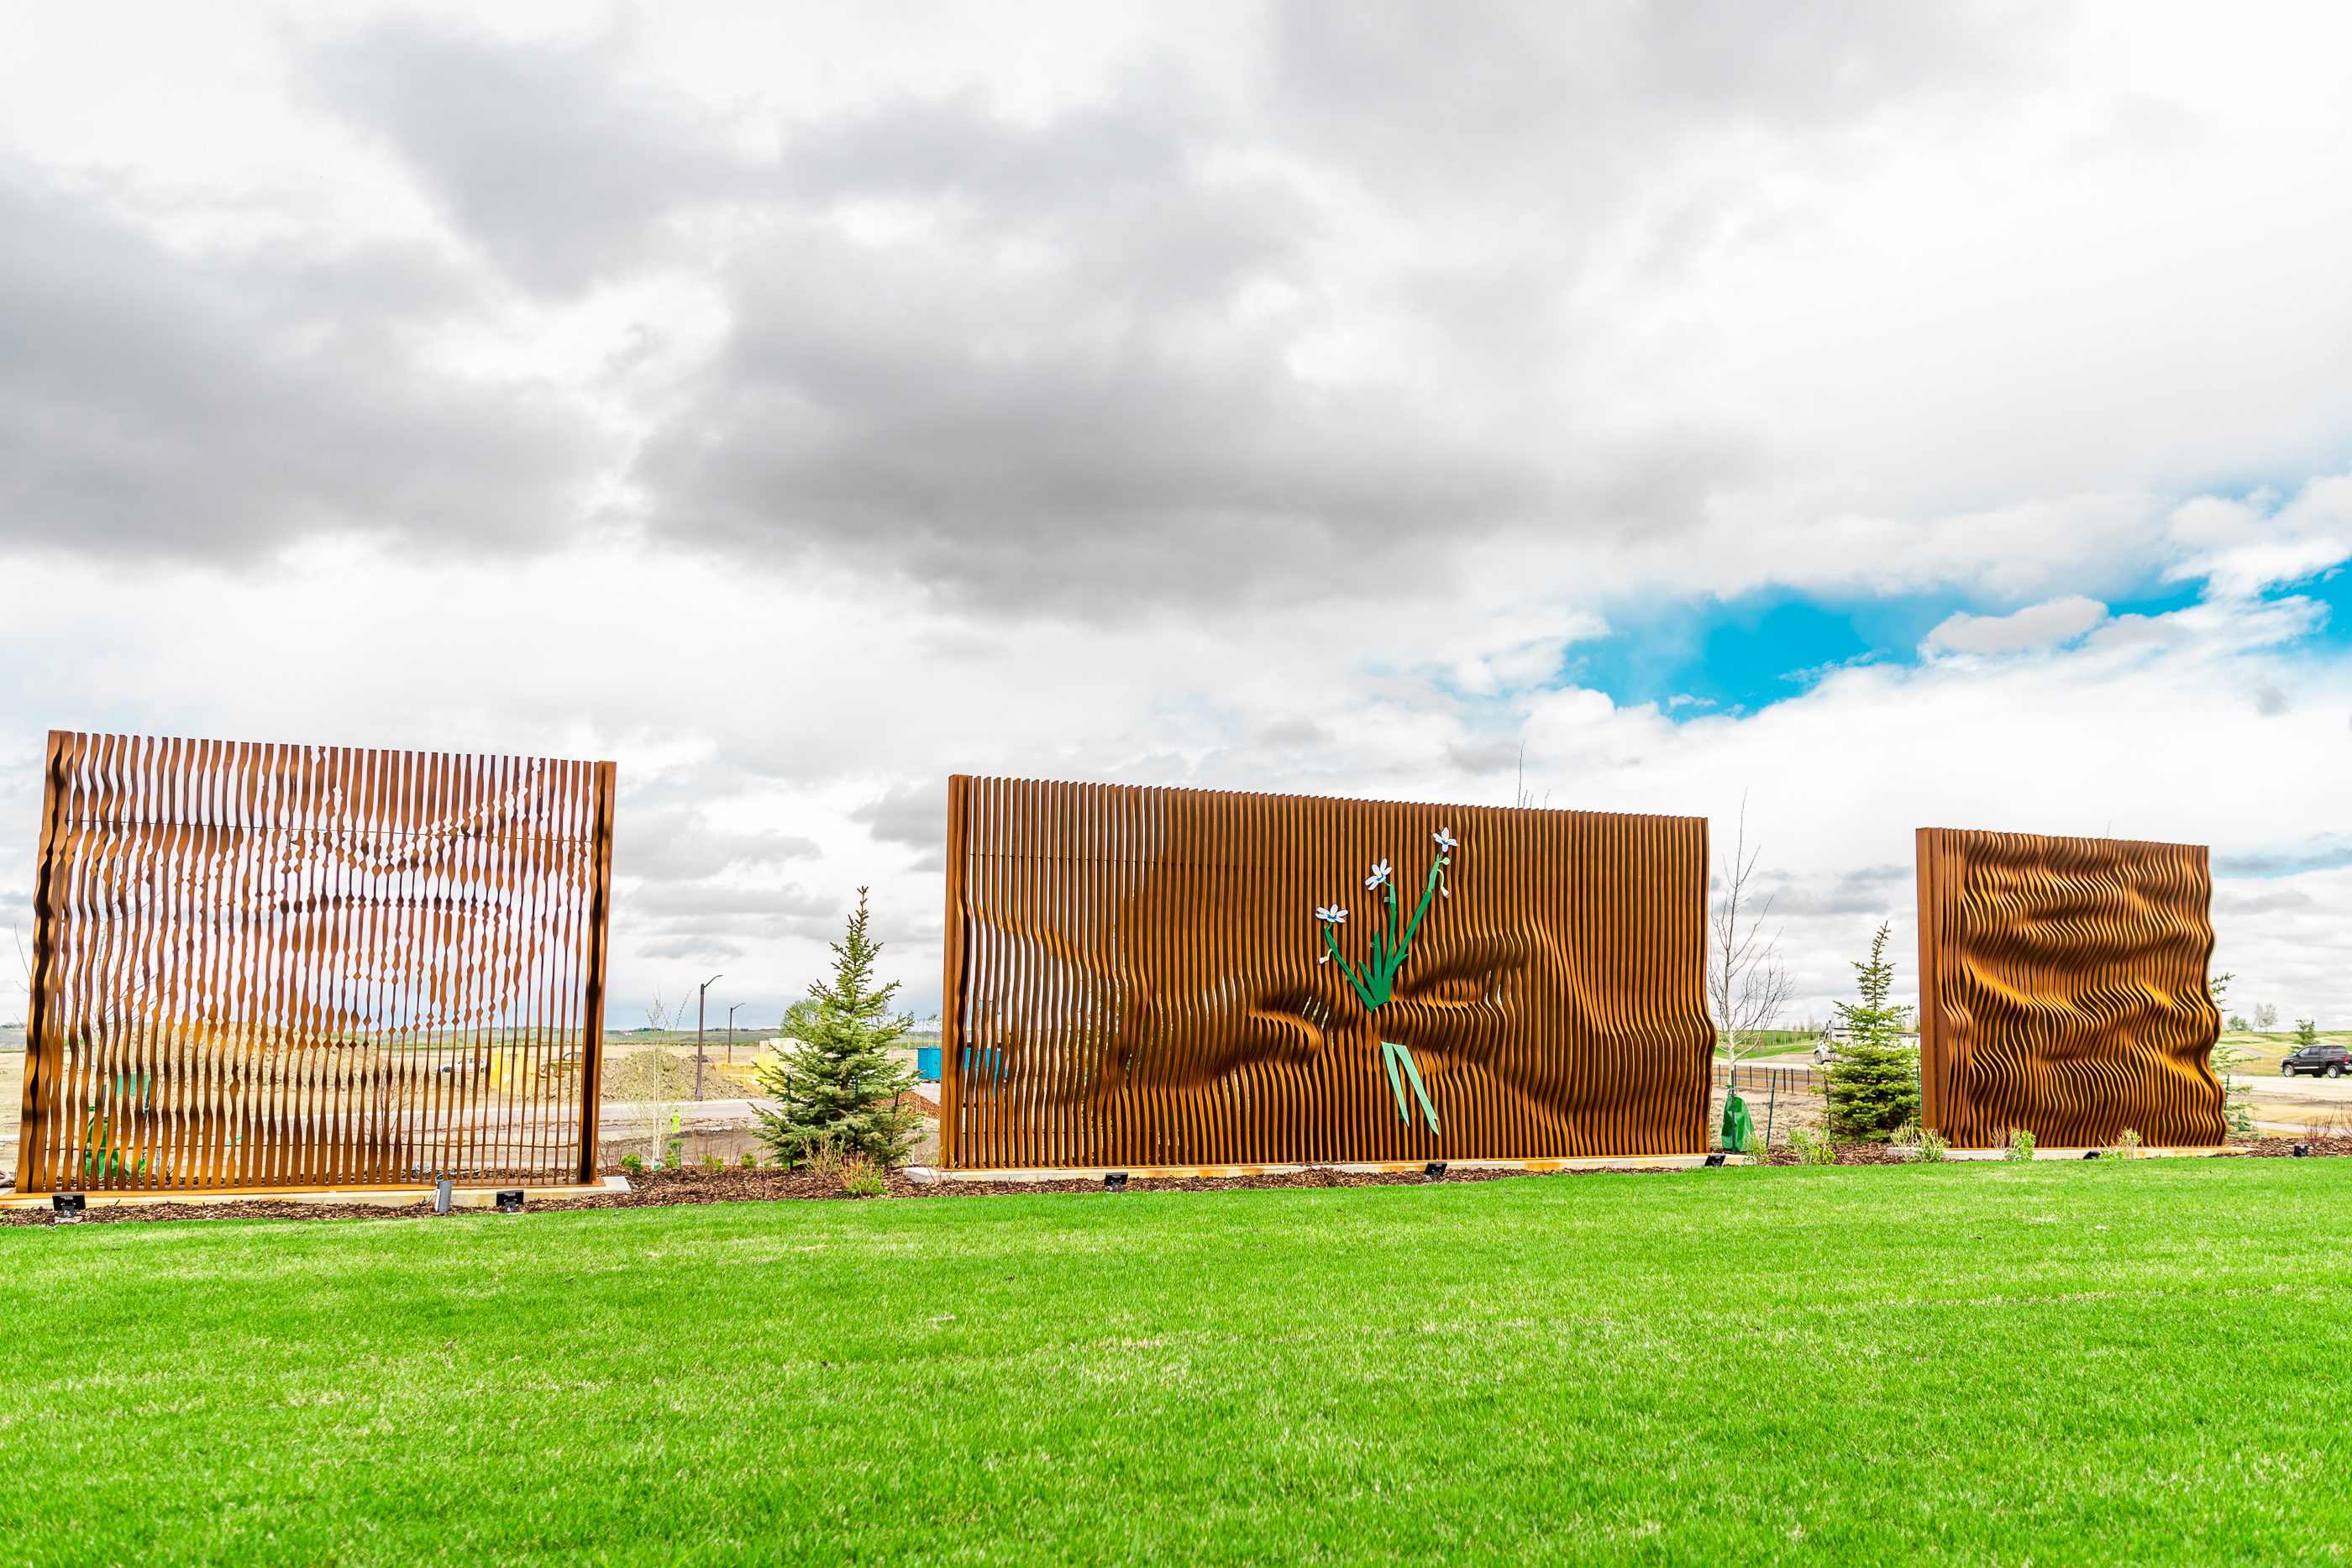 Gordon Skilling’s “[Re]newal - Profound Cycles”. In the centre of the piece, two hands are passing a rare species of grass.